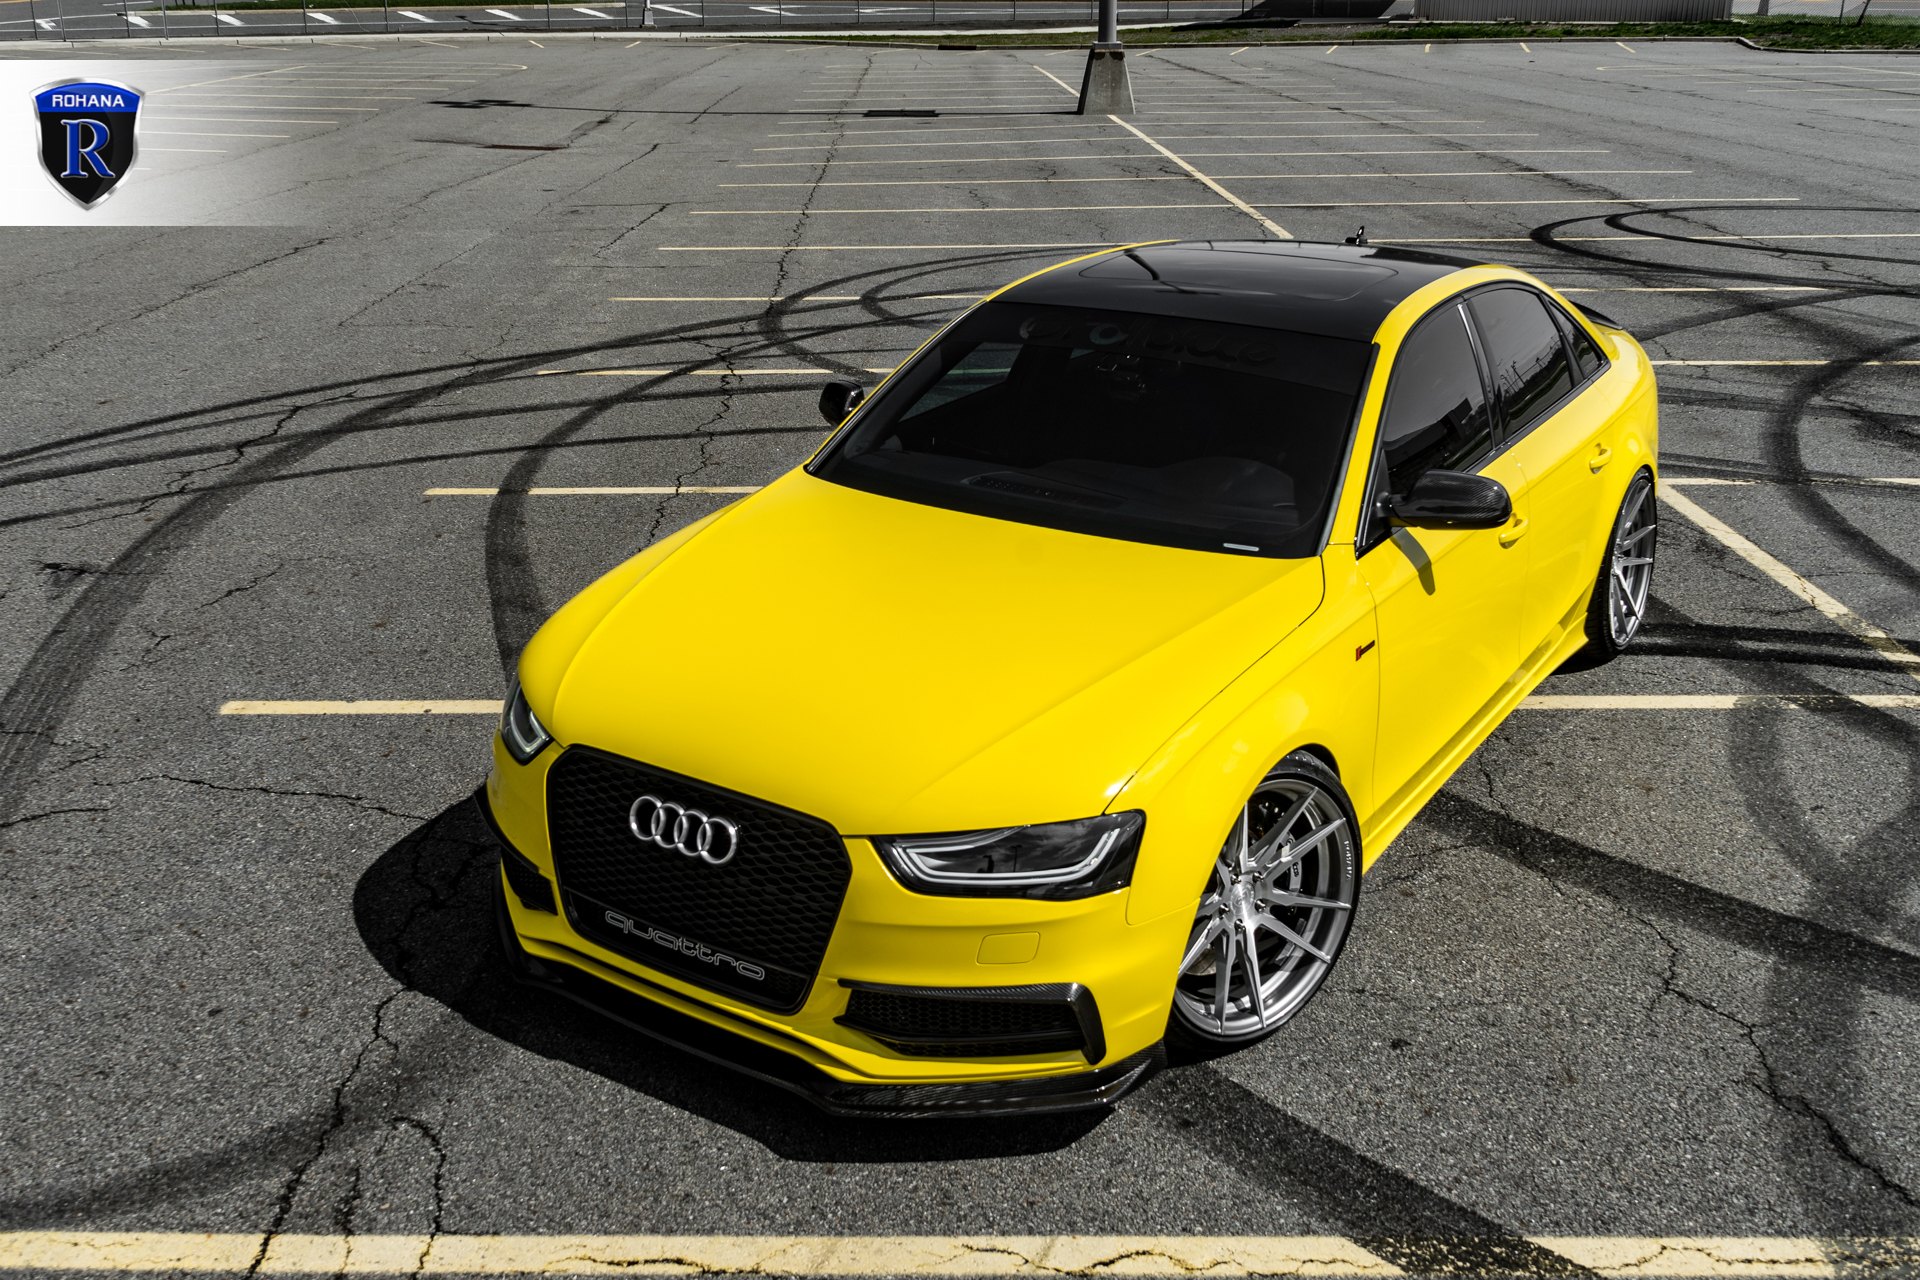 Blacked Out Mesh Grille on Yellow Audi S4 - Photo by Rohana Wheels